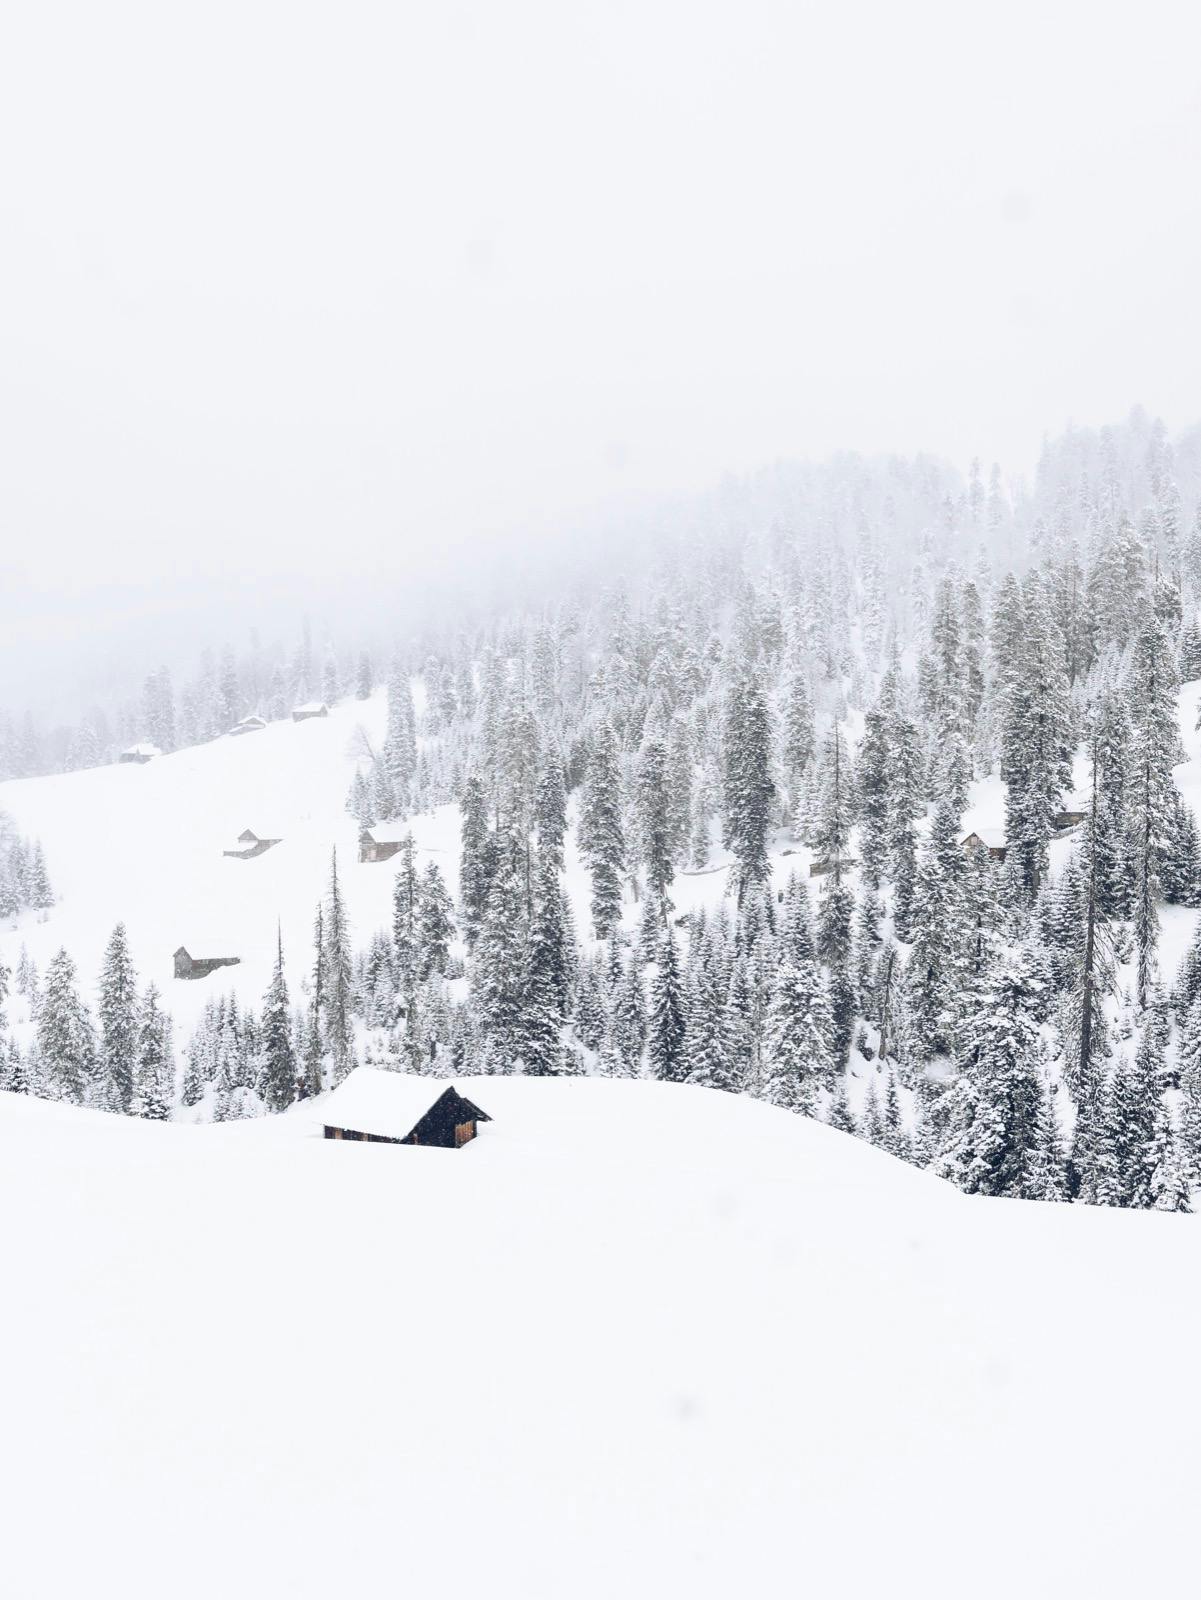 A lonely mountain hut in covered in snow in Georgia